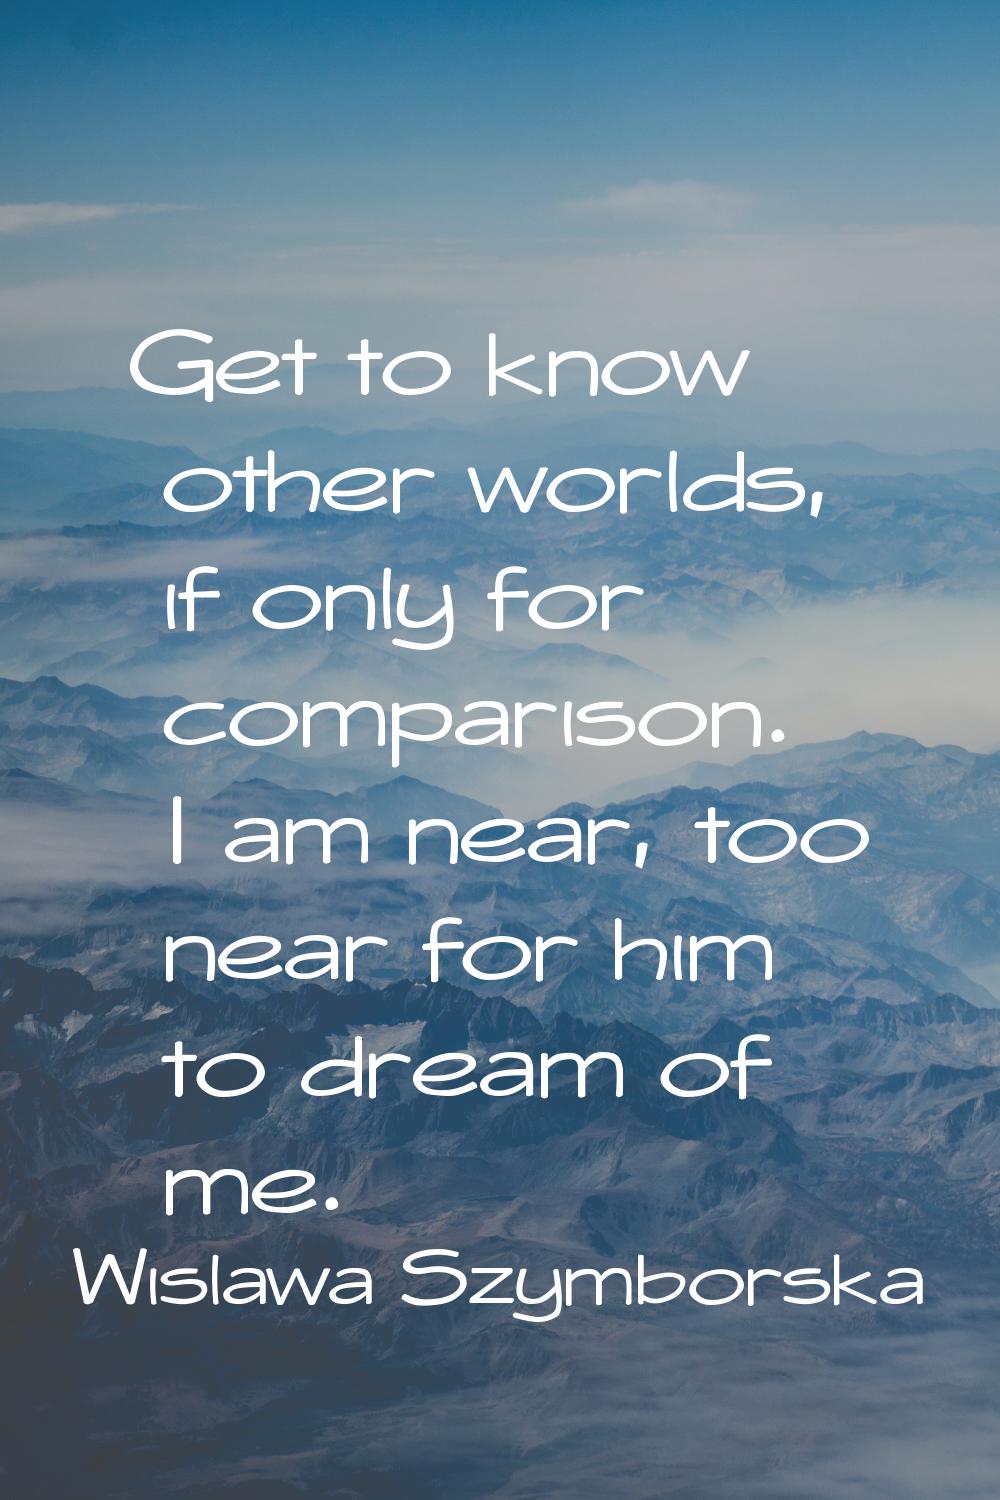 Get to know other worlds, if only for comparison. I am near, too near for him to dream of me.